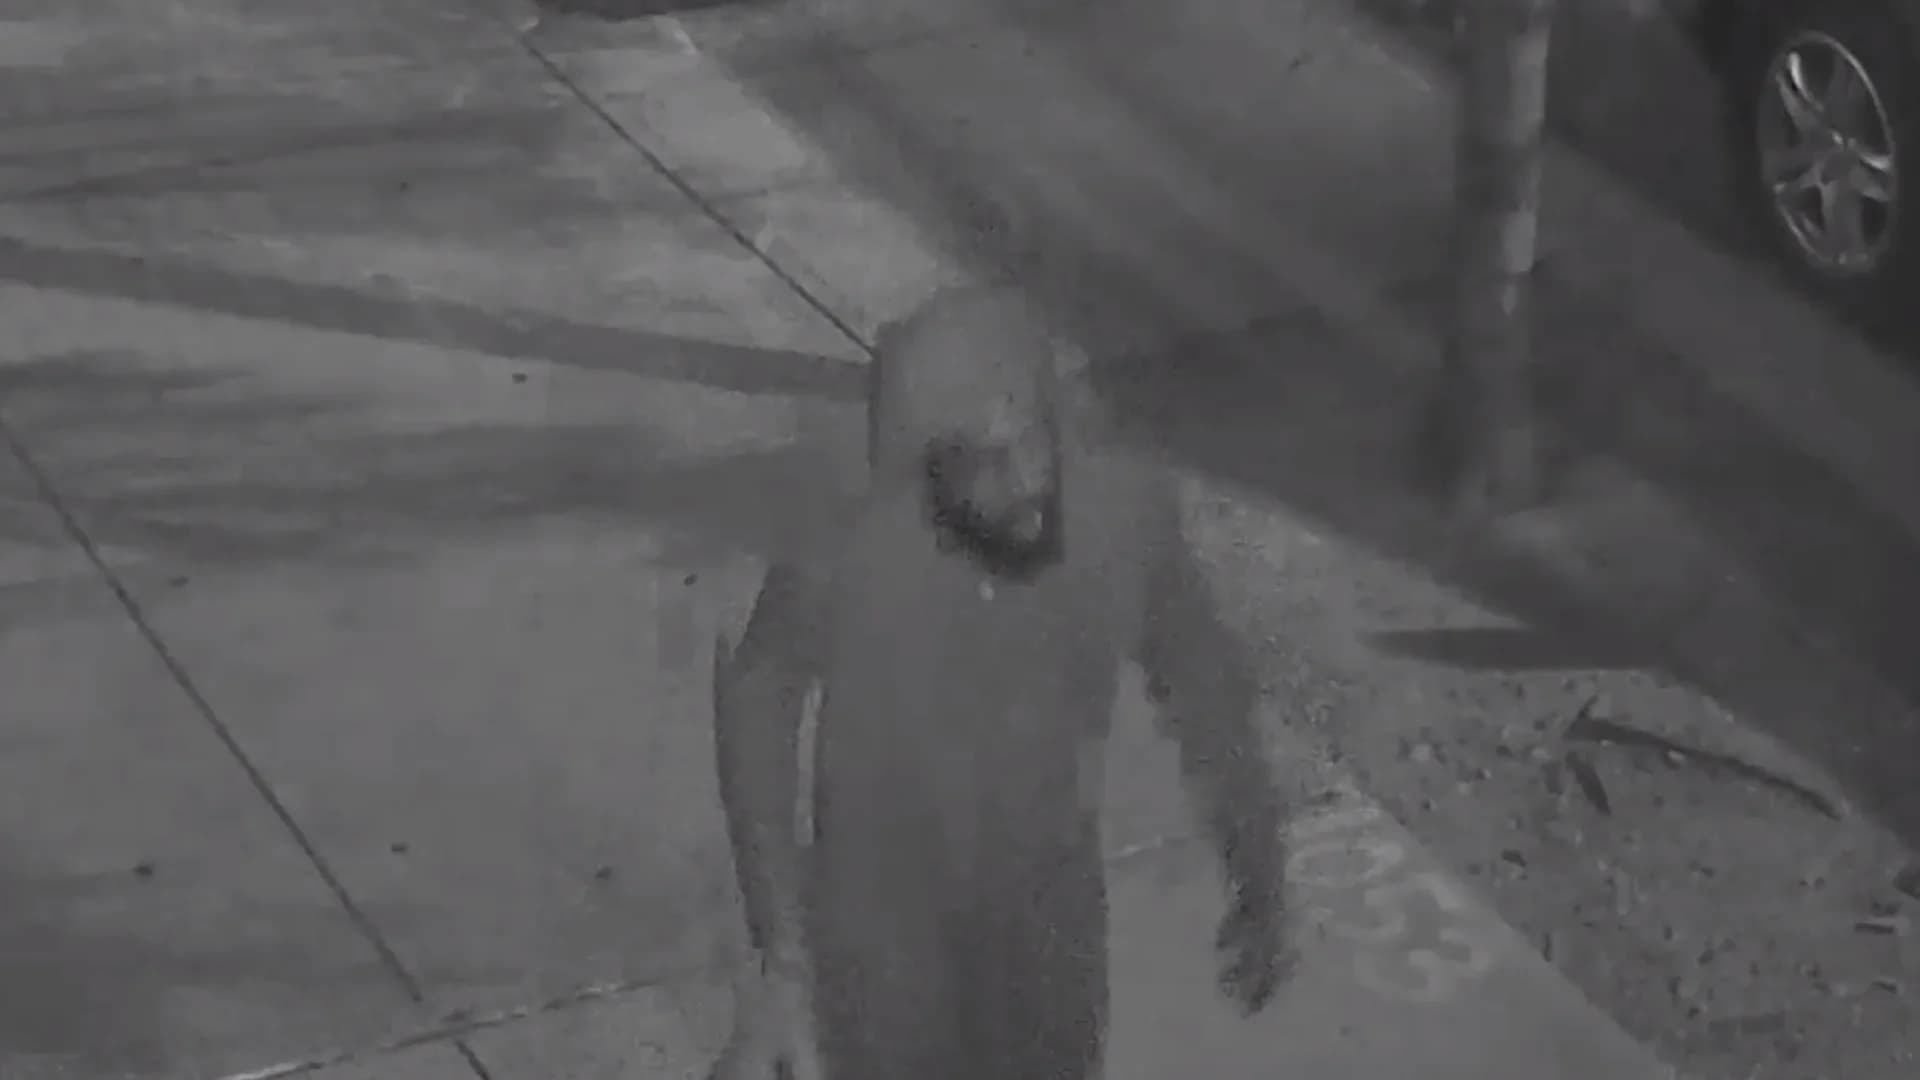 Video shows man lunging, assaulting woman on Brooklyn street